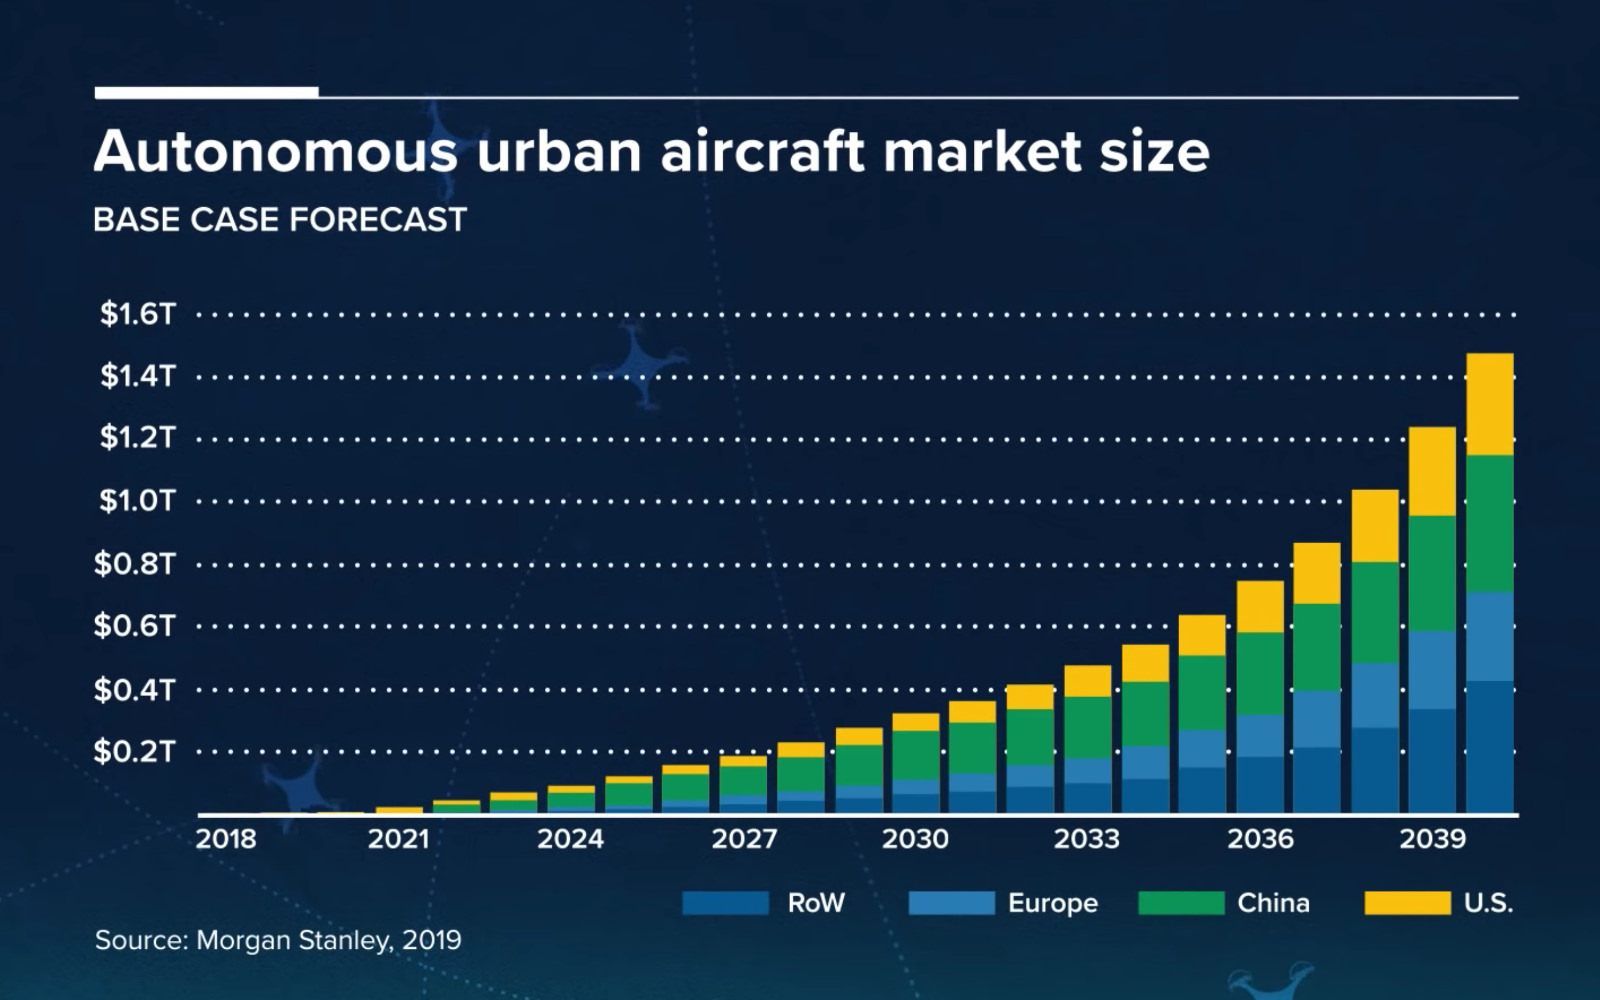 Drones are growing into a $100 billion industry